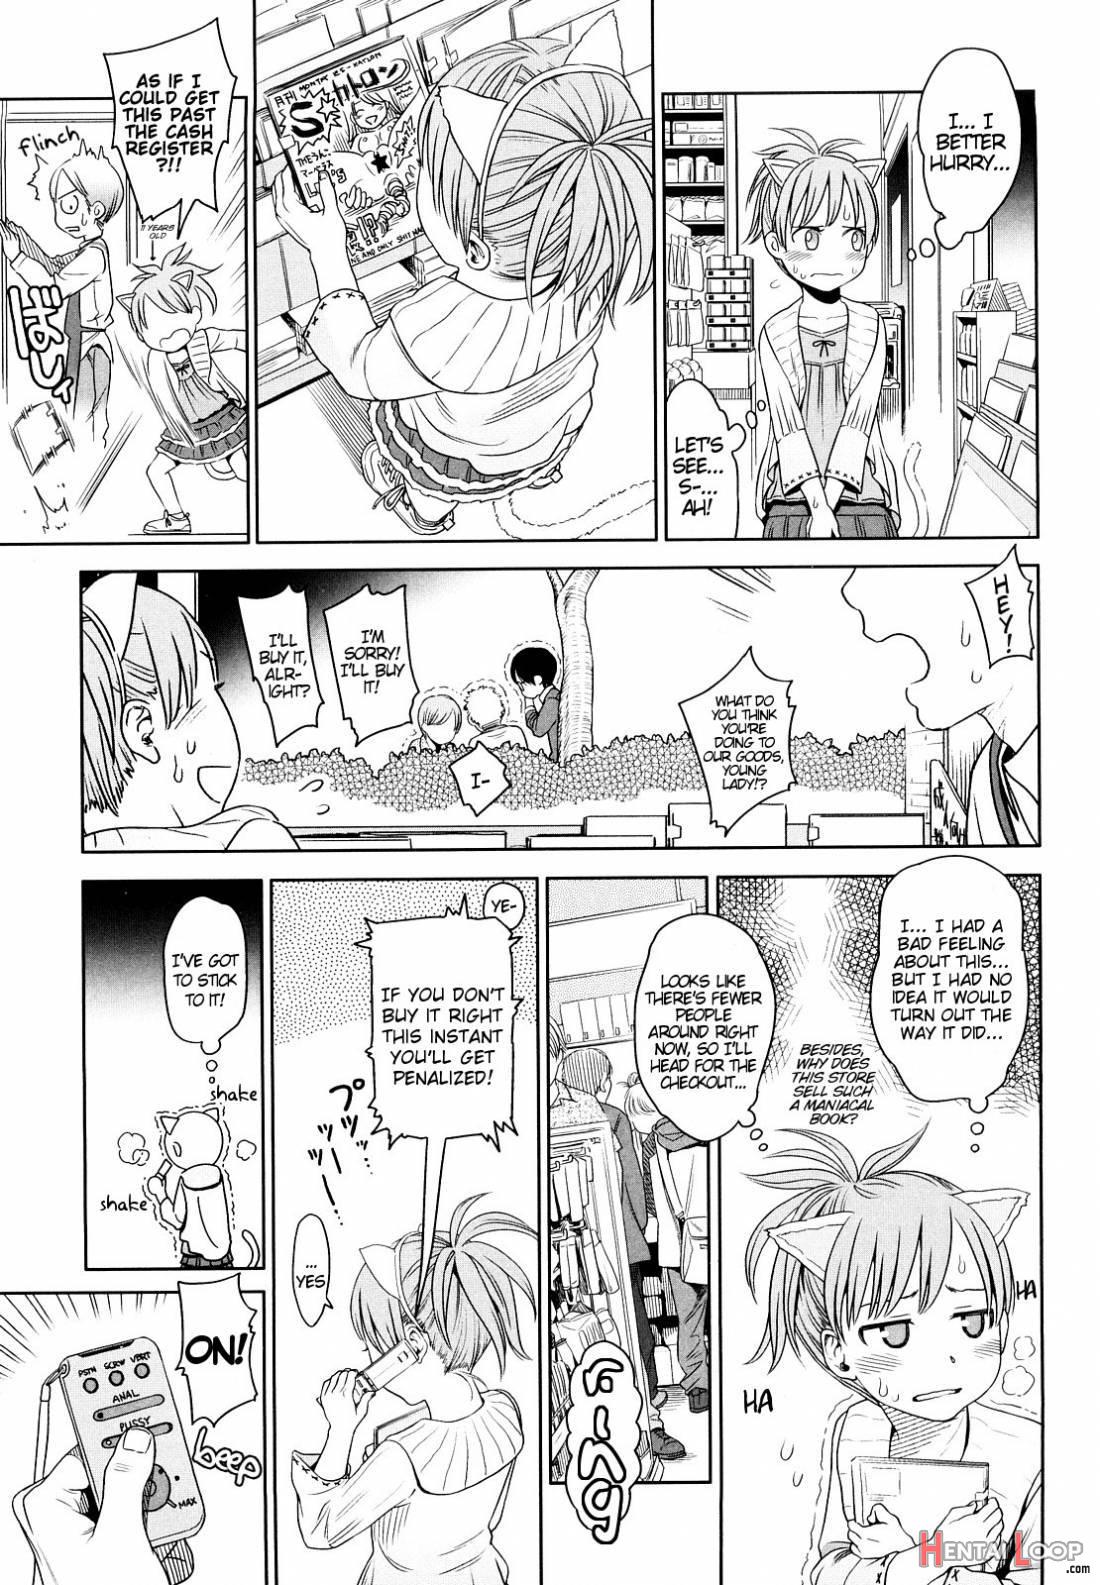 Japanese Preteen Suite page 10